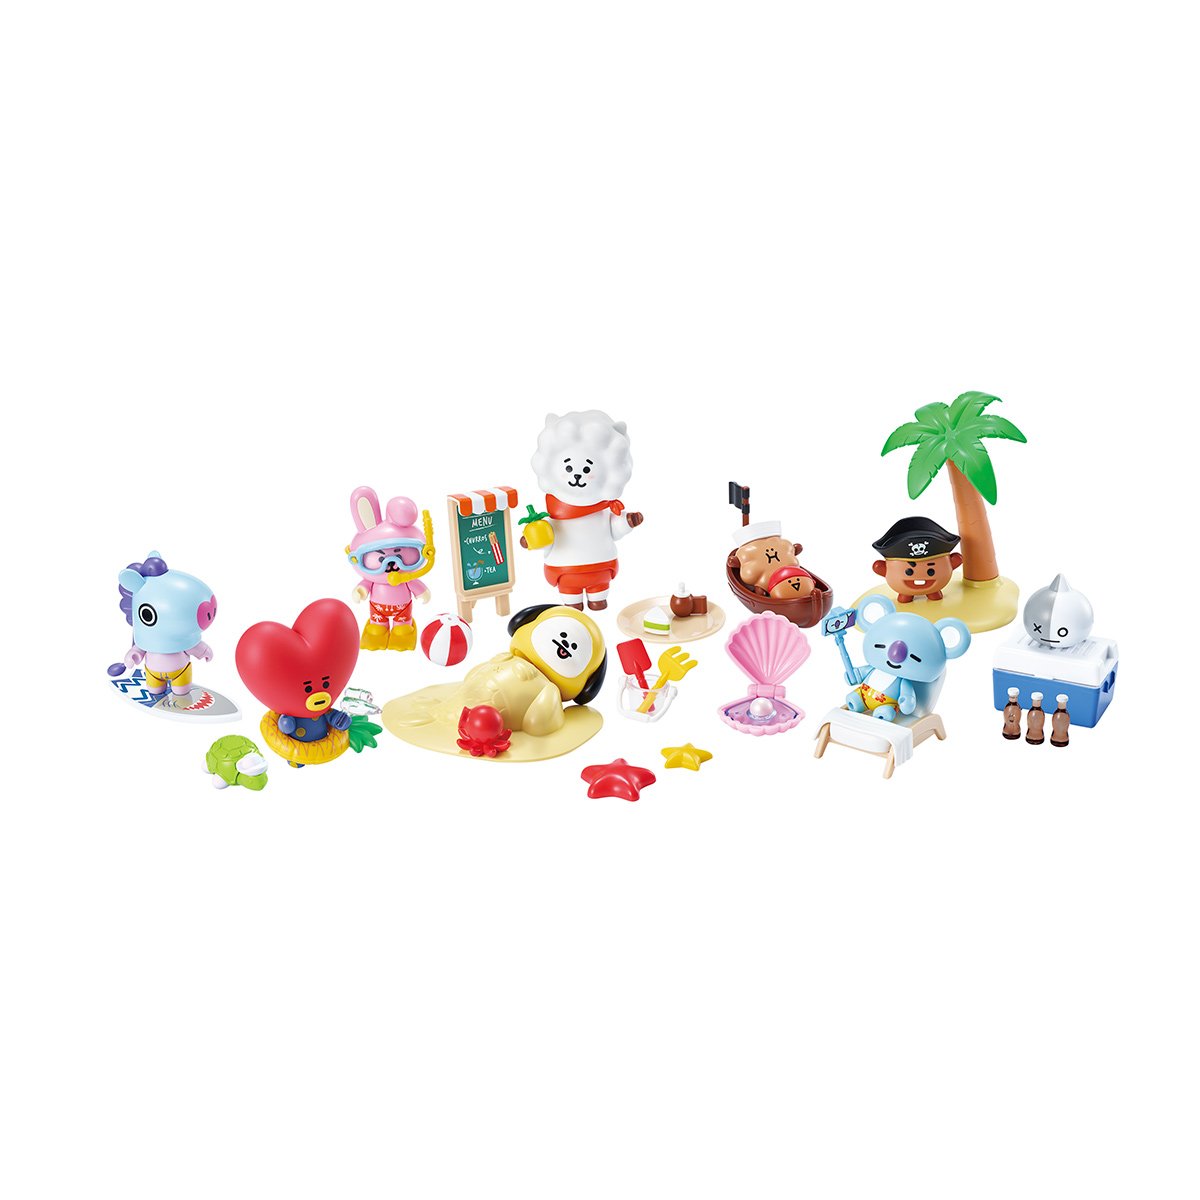 [BT21] Collectable Figurine Blind Pack Vol 2 : Summer Vacation Theme